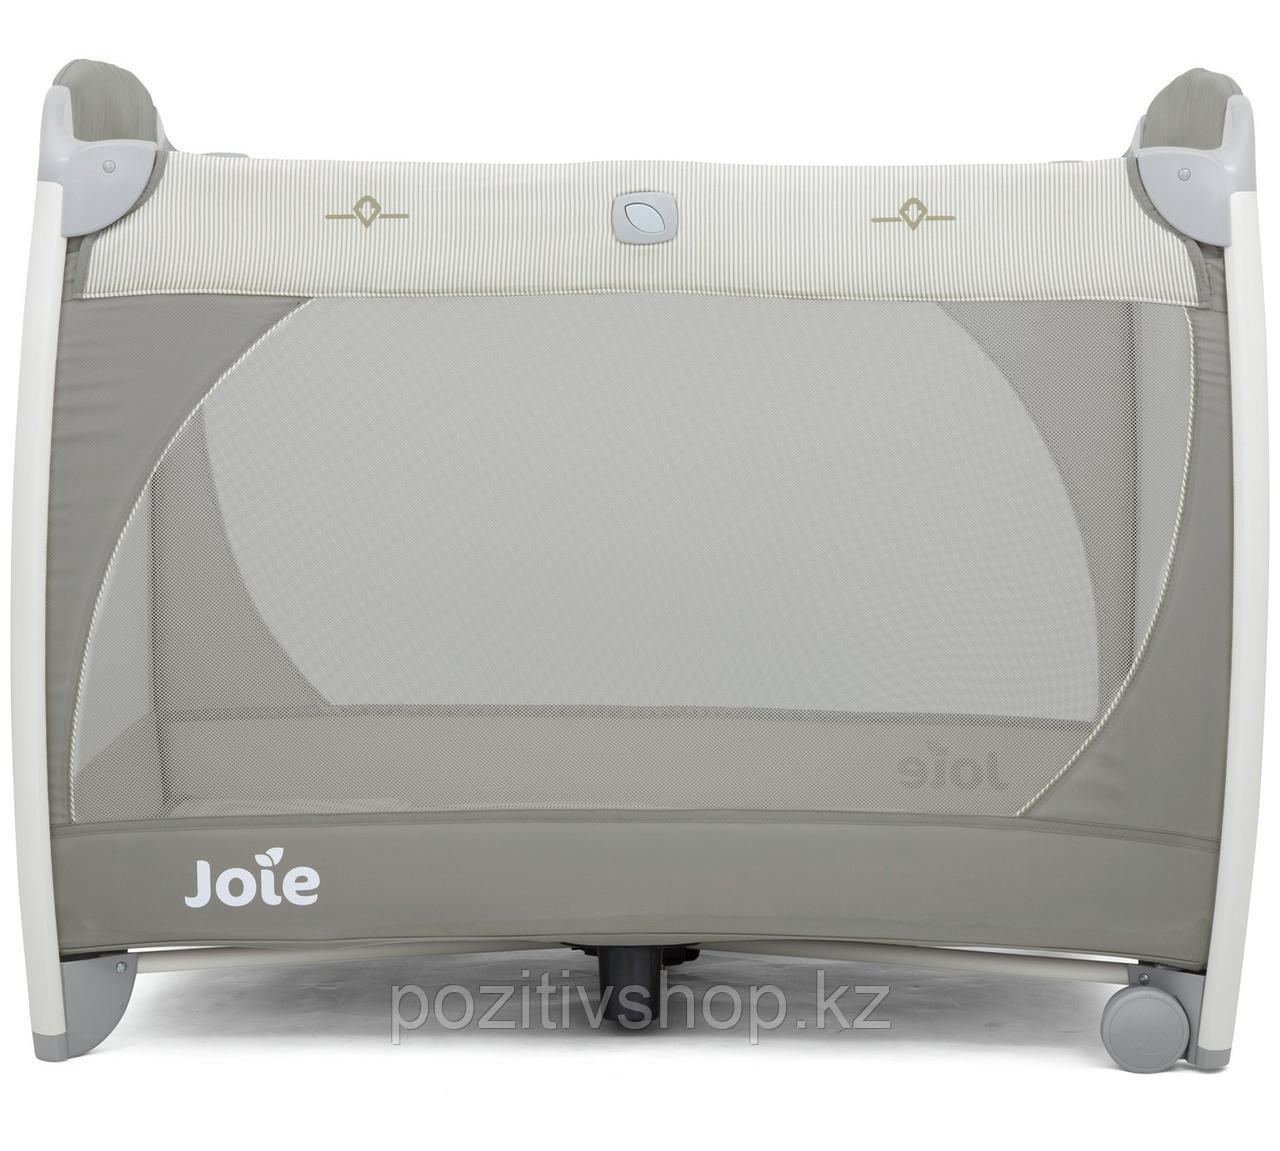 Манеж Joie Playard Excursion change and bounce cosy spaces - фото 7 - id-p71598438